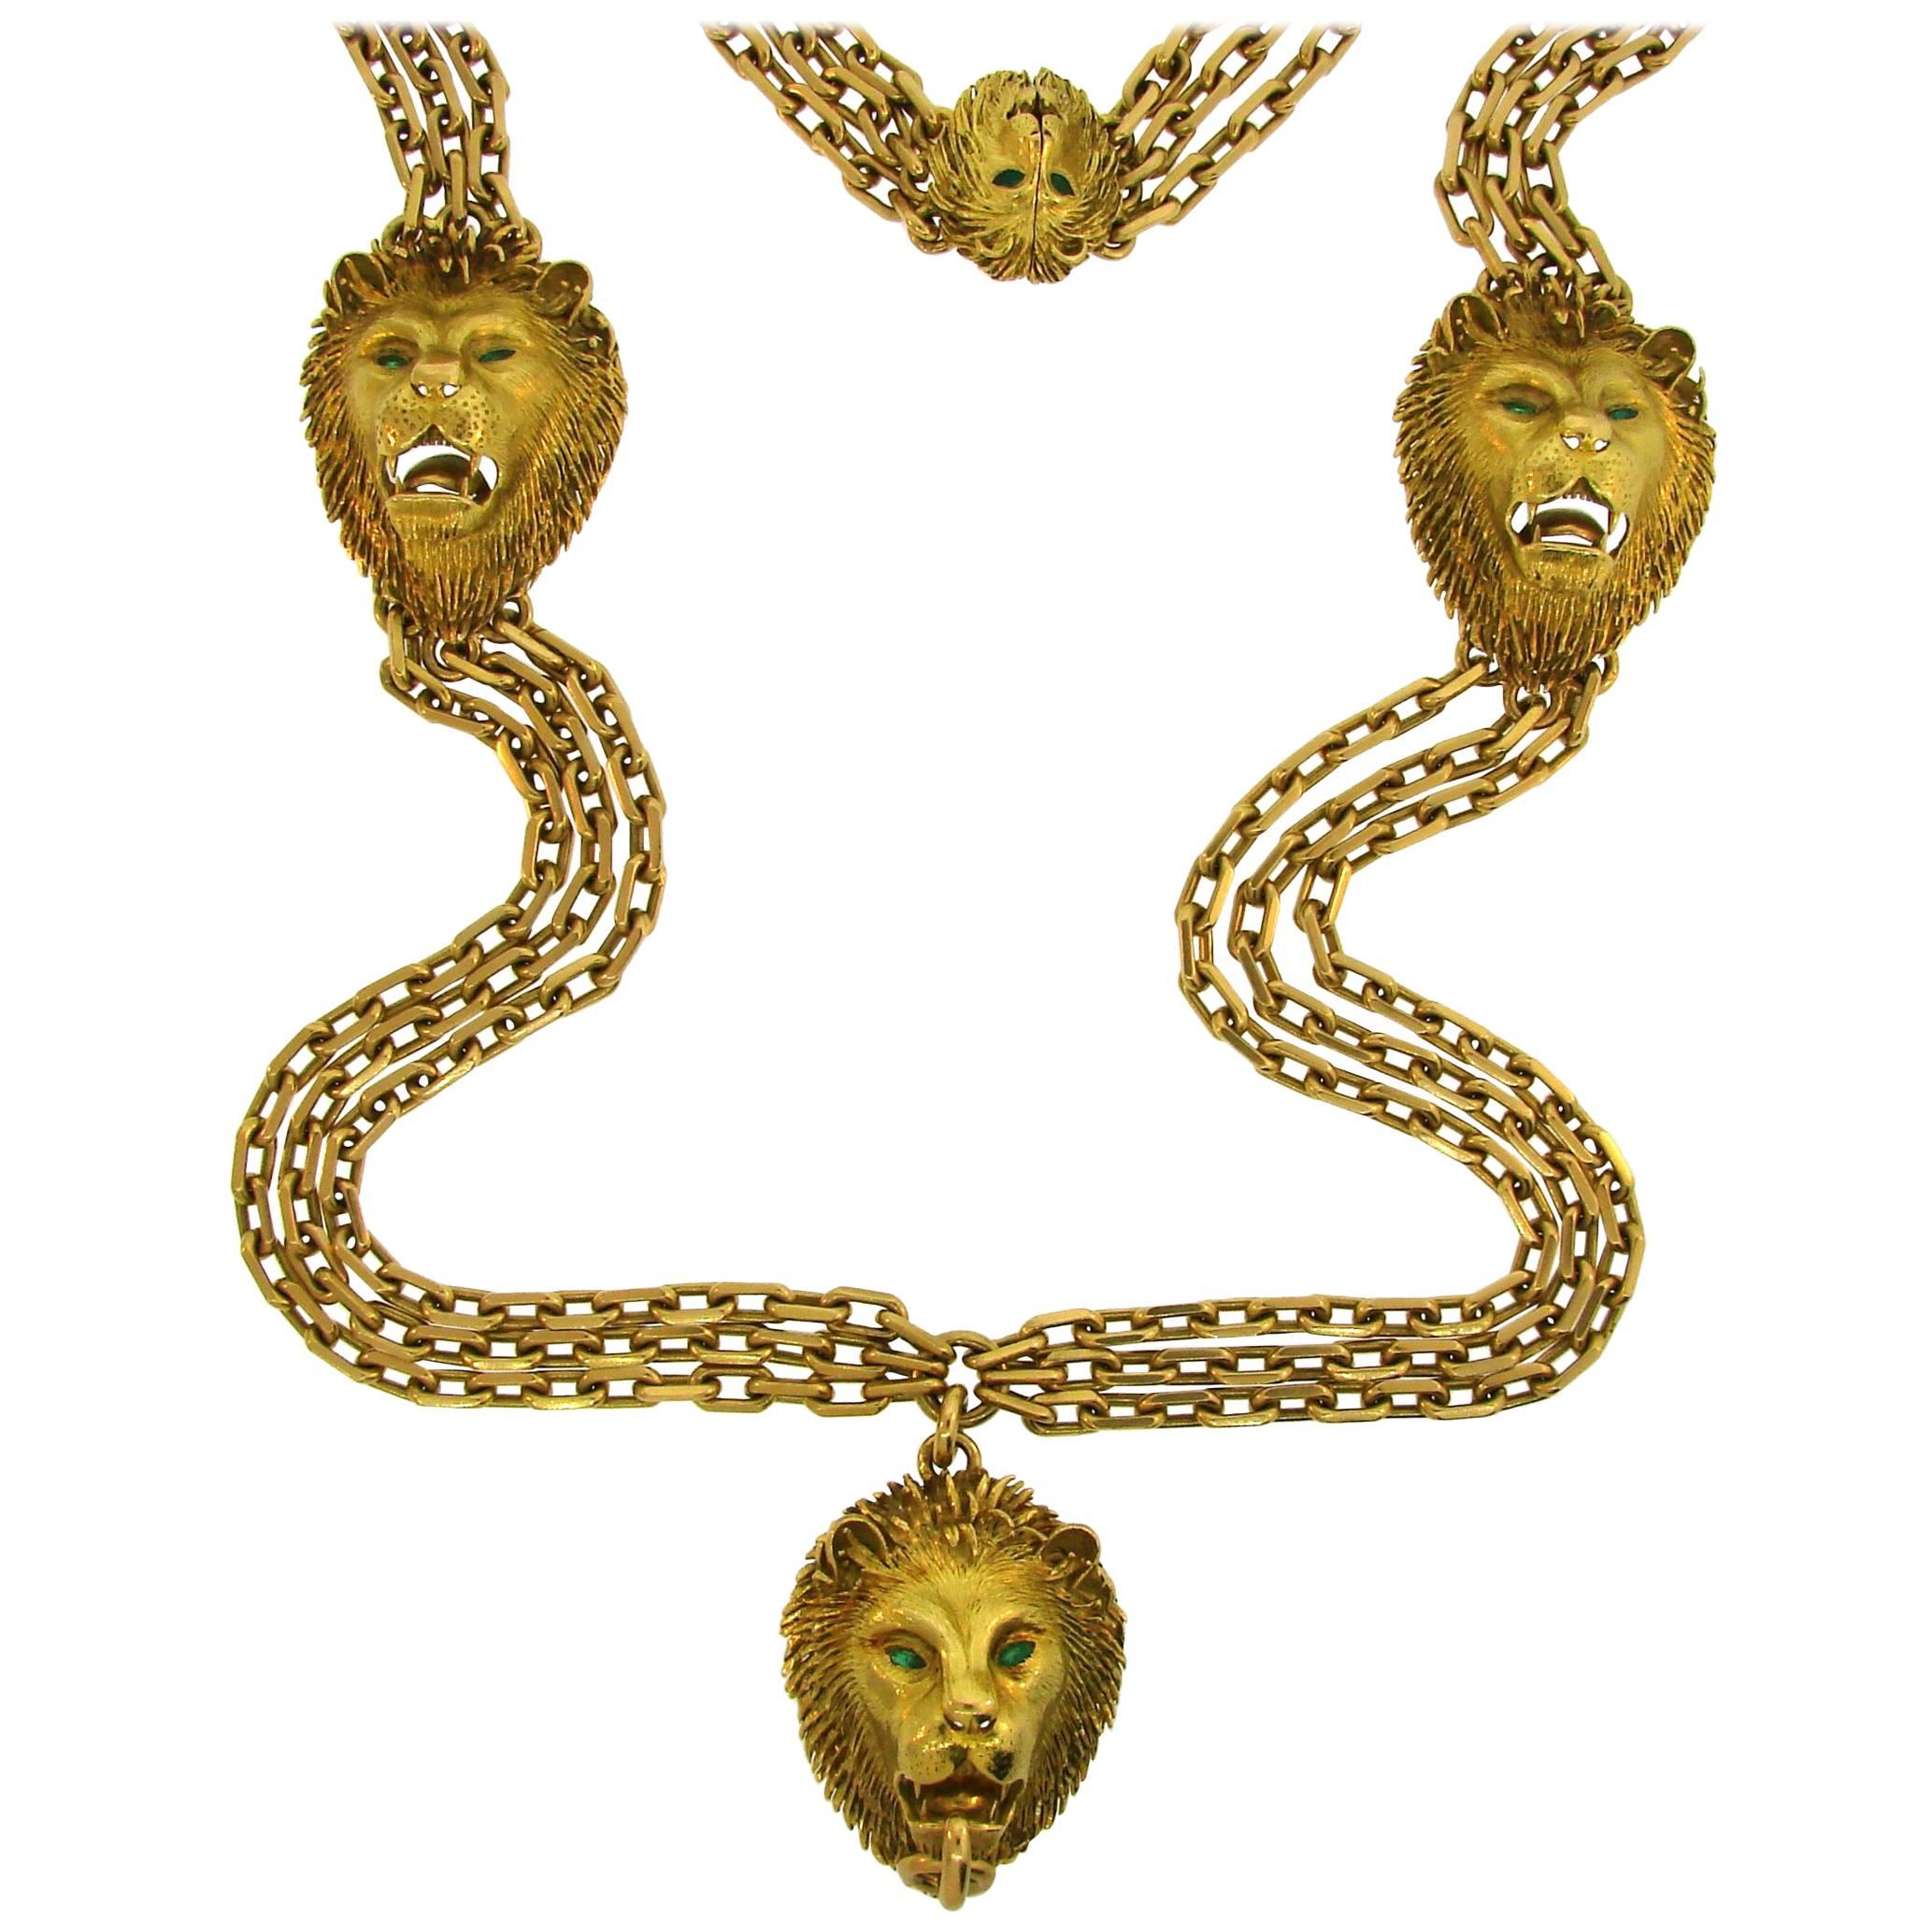 French Emerald Yellow Gold Chain Necklace with Lion Medallions, 1970s